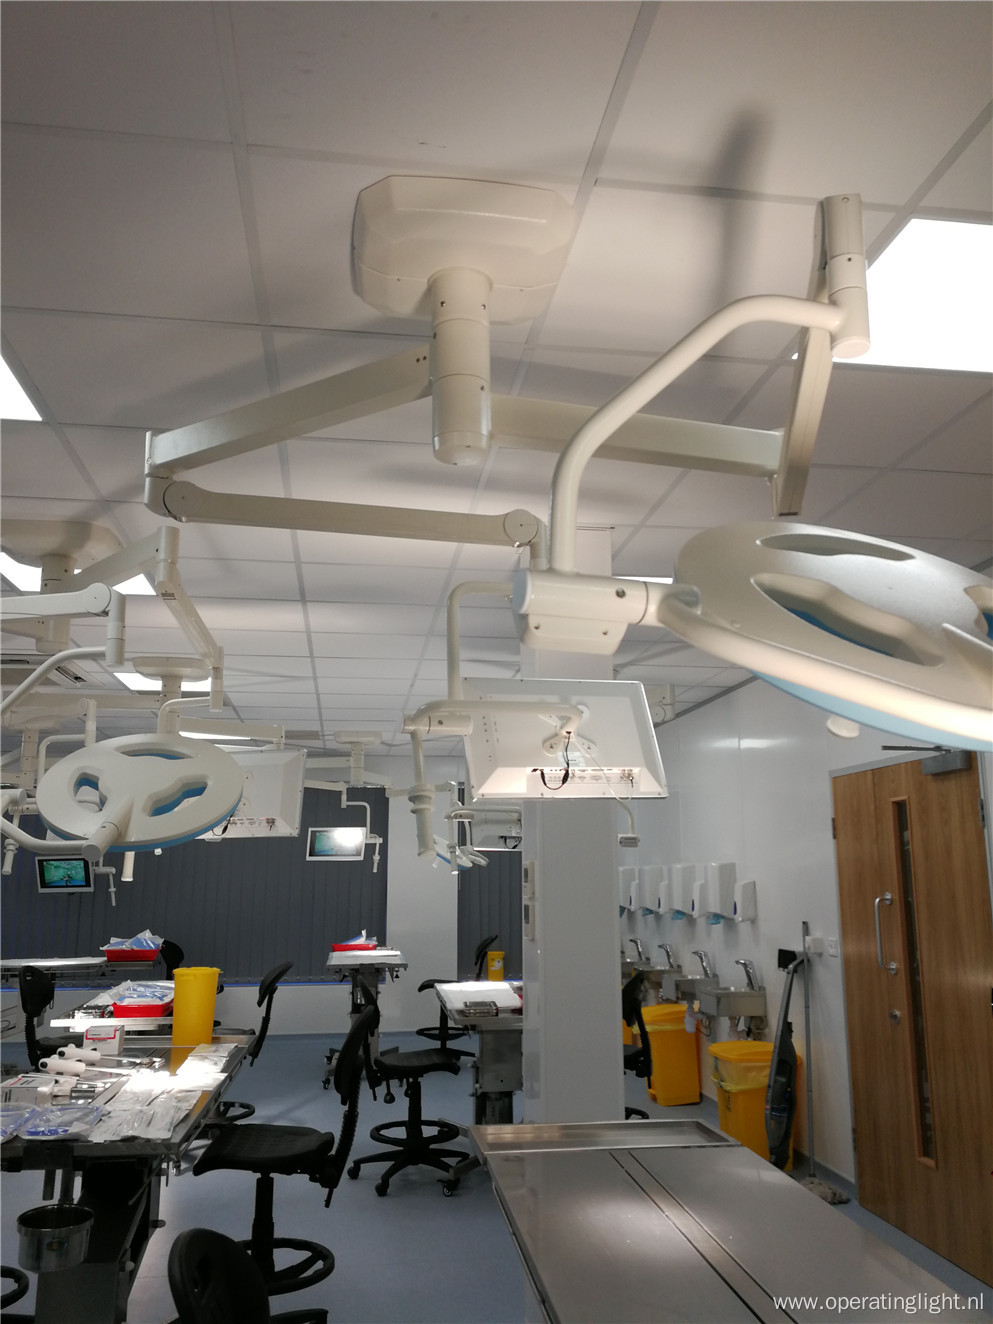 Ceiling and wall mounted led surgical lamps